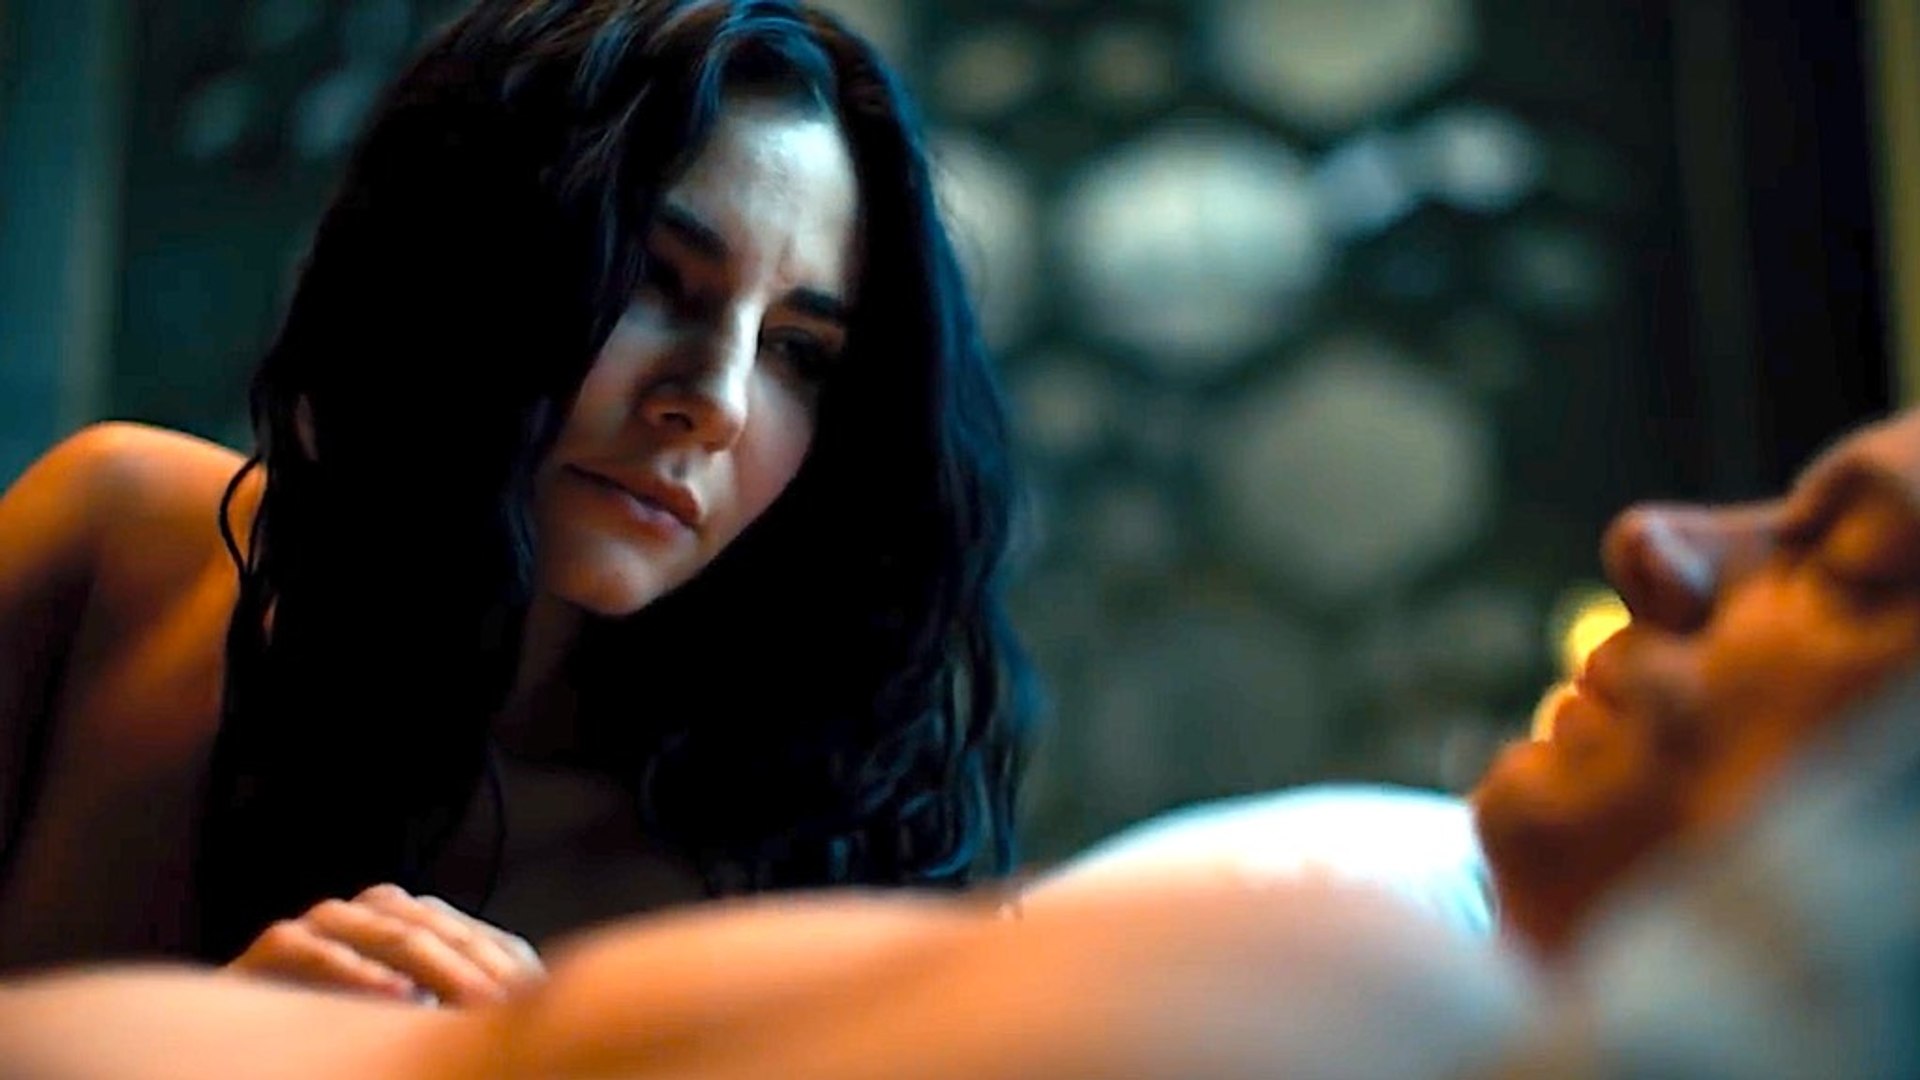 Martha higareda nude in altered carbon.